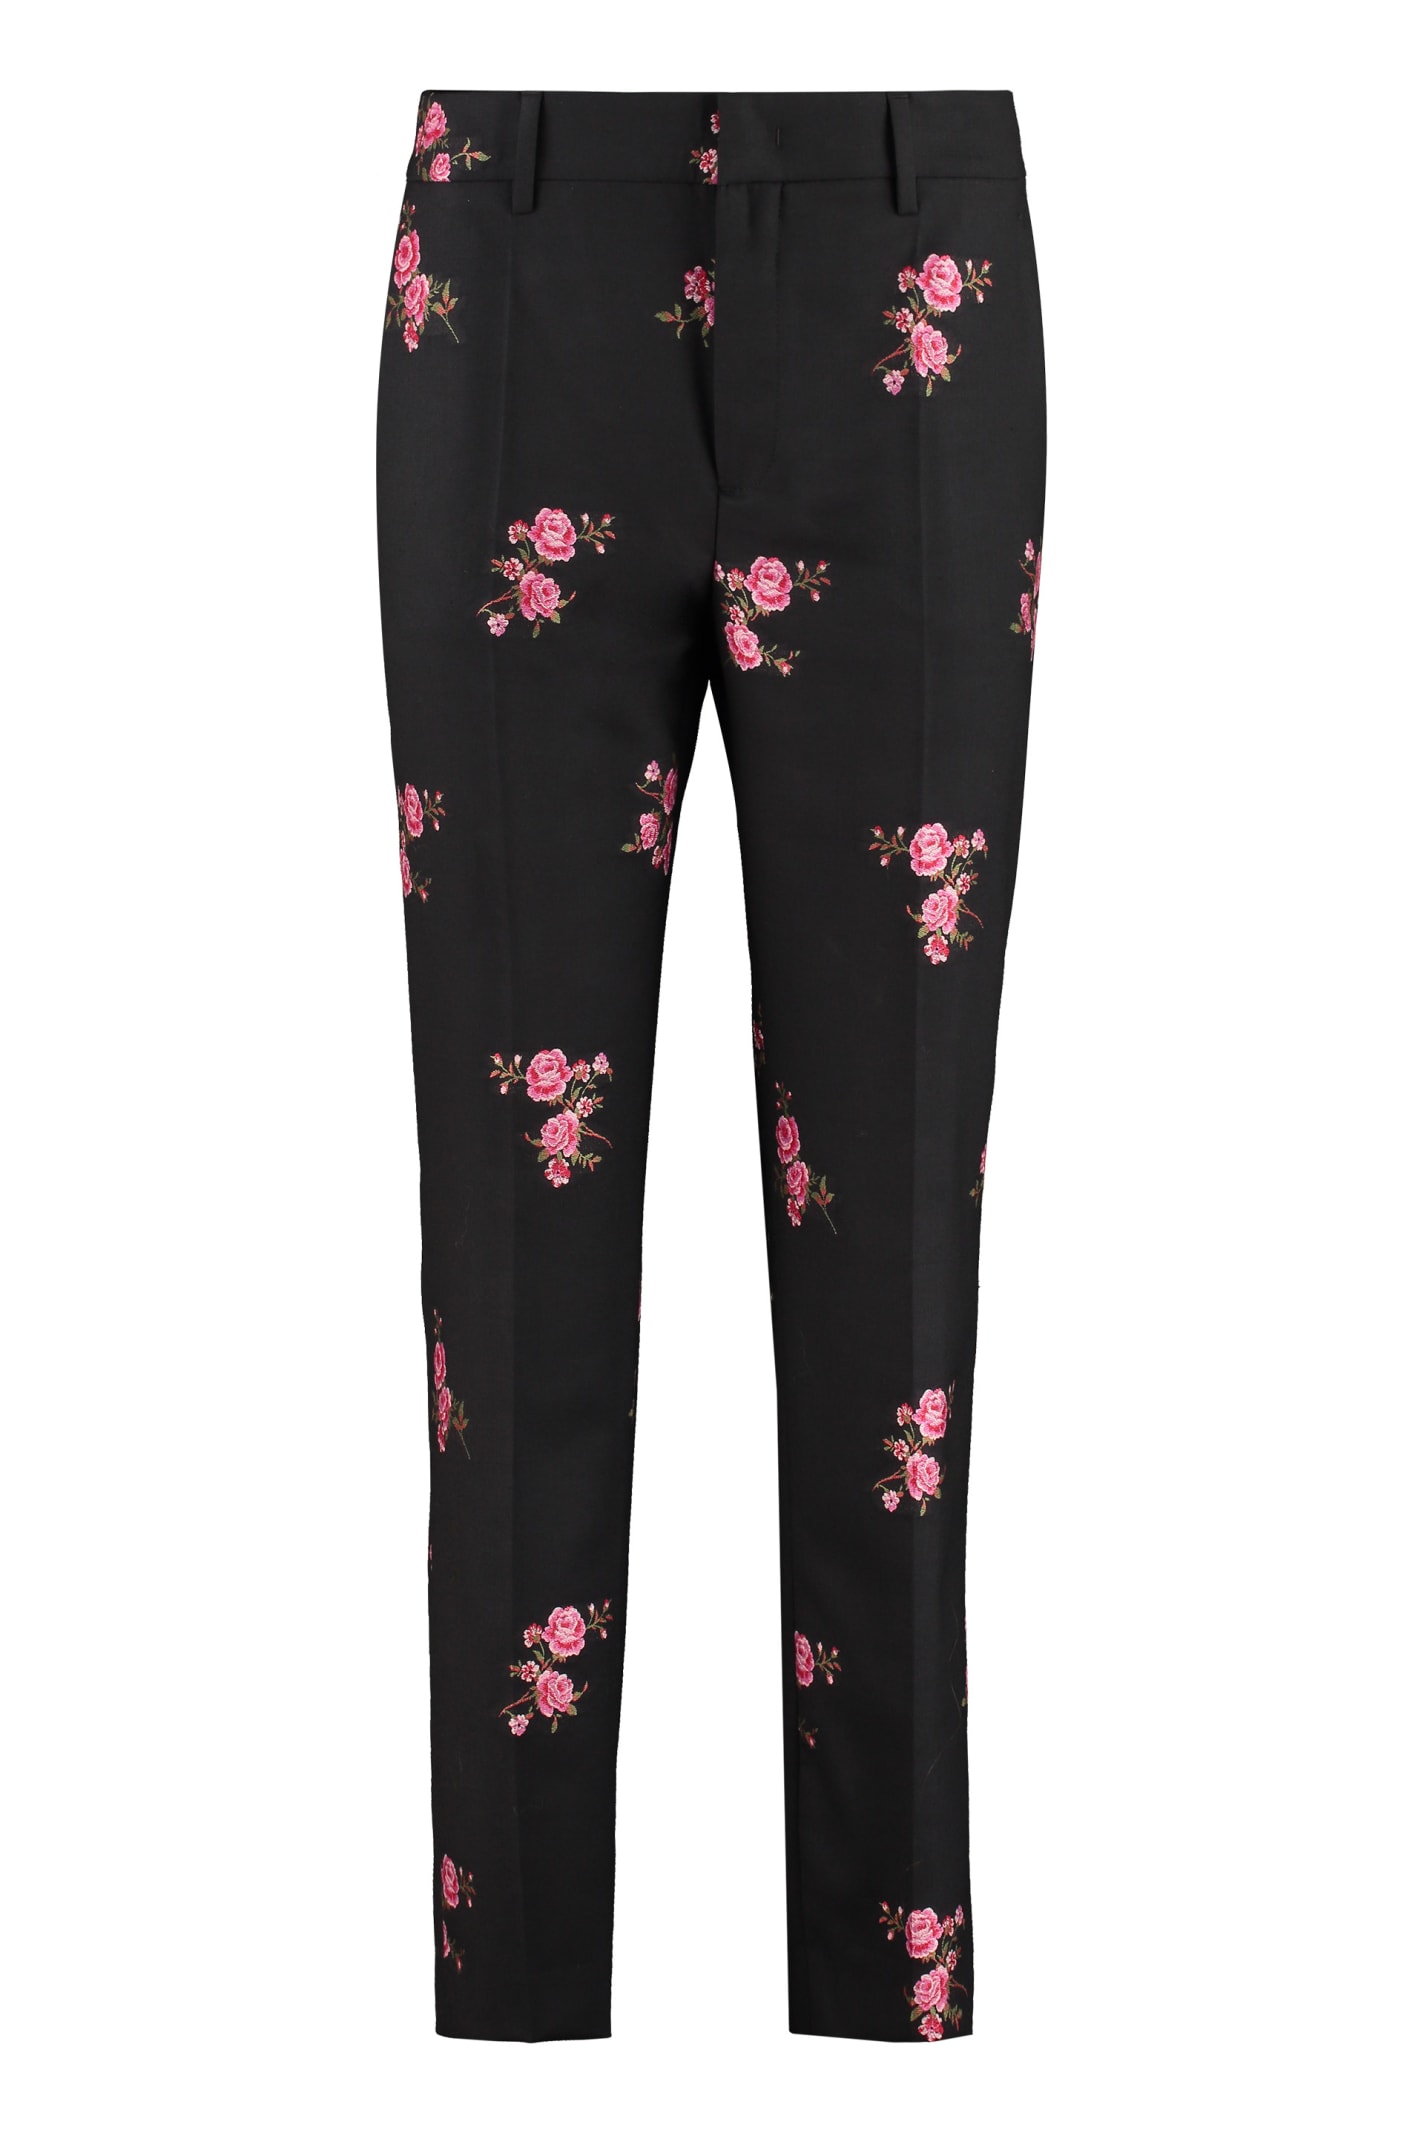 RED Valentino Wool Blend Tailored Trousers